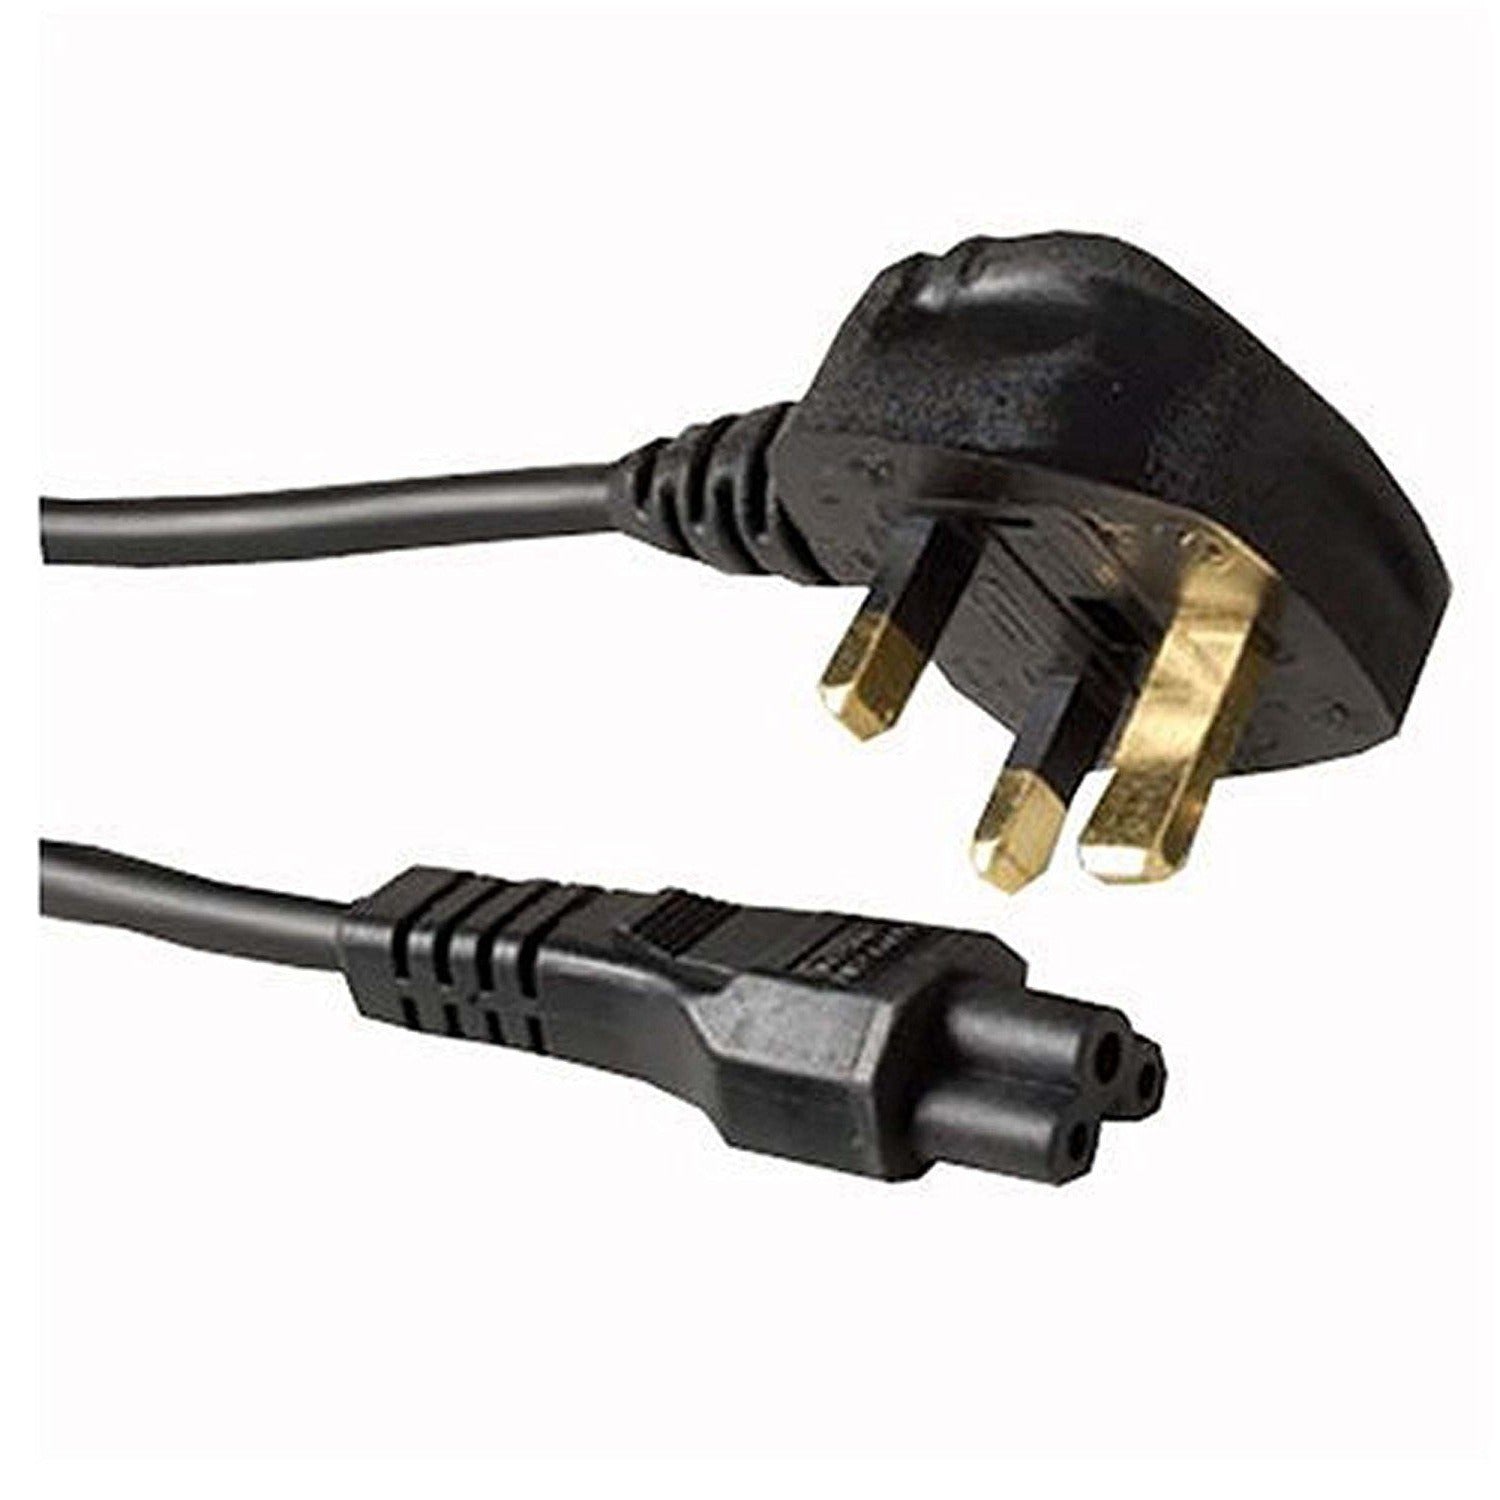 Clover Lead | Clover Power Cable | UK Plug to C5 Mains Cable | Laptop Power Cable | 1.8m to 10m Lengths Cables Direct